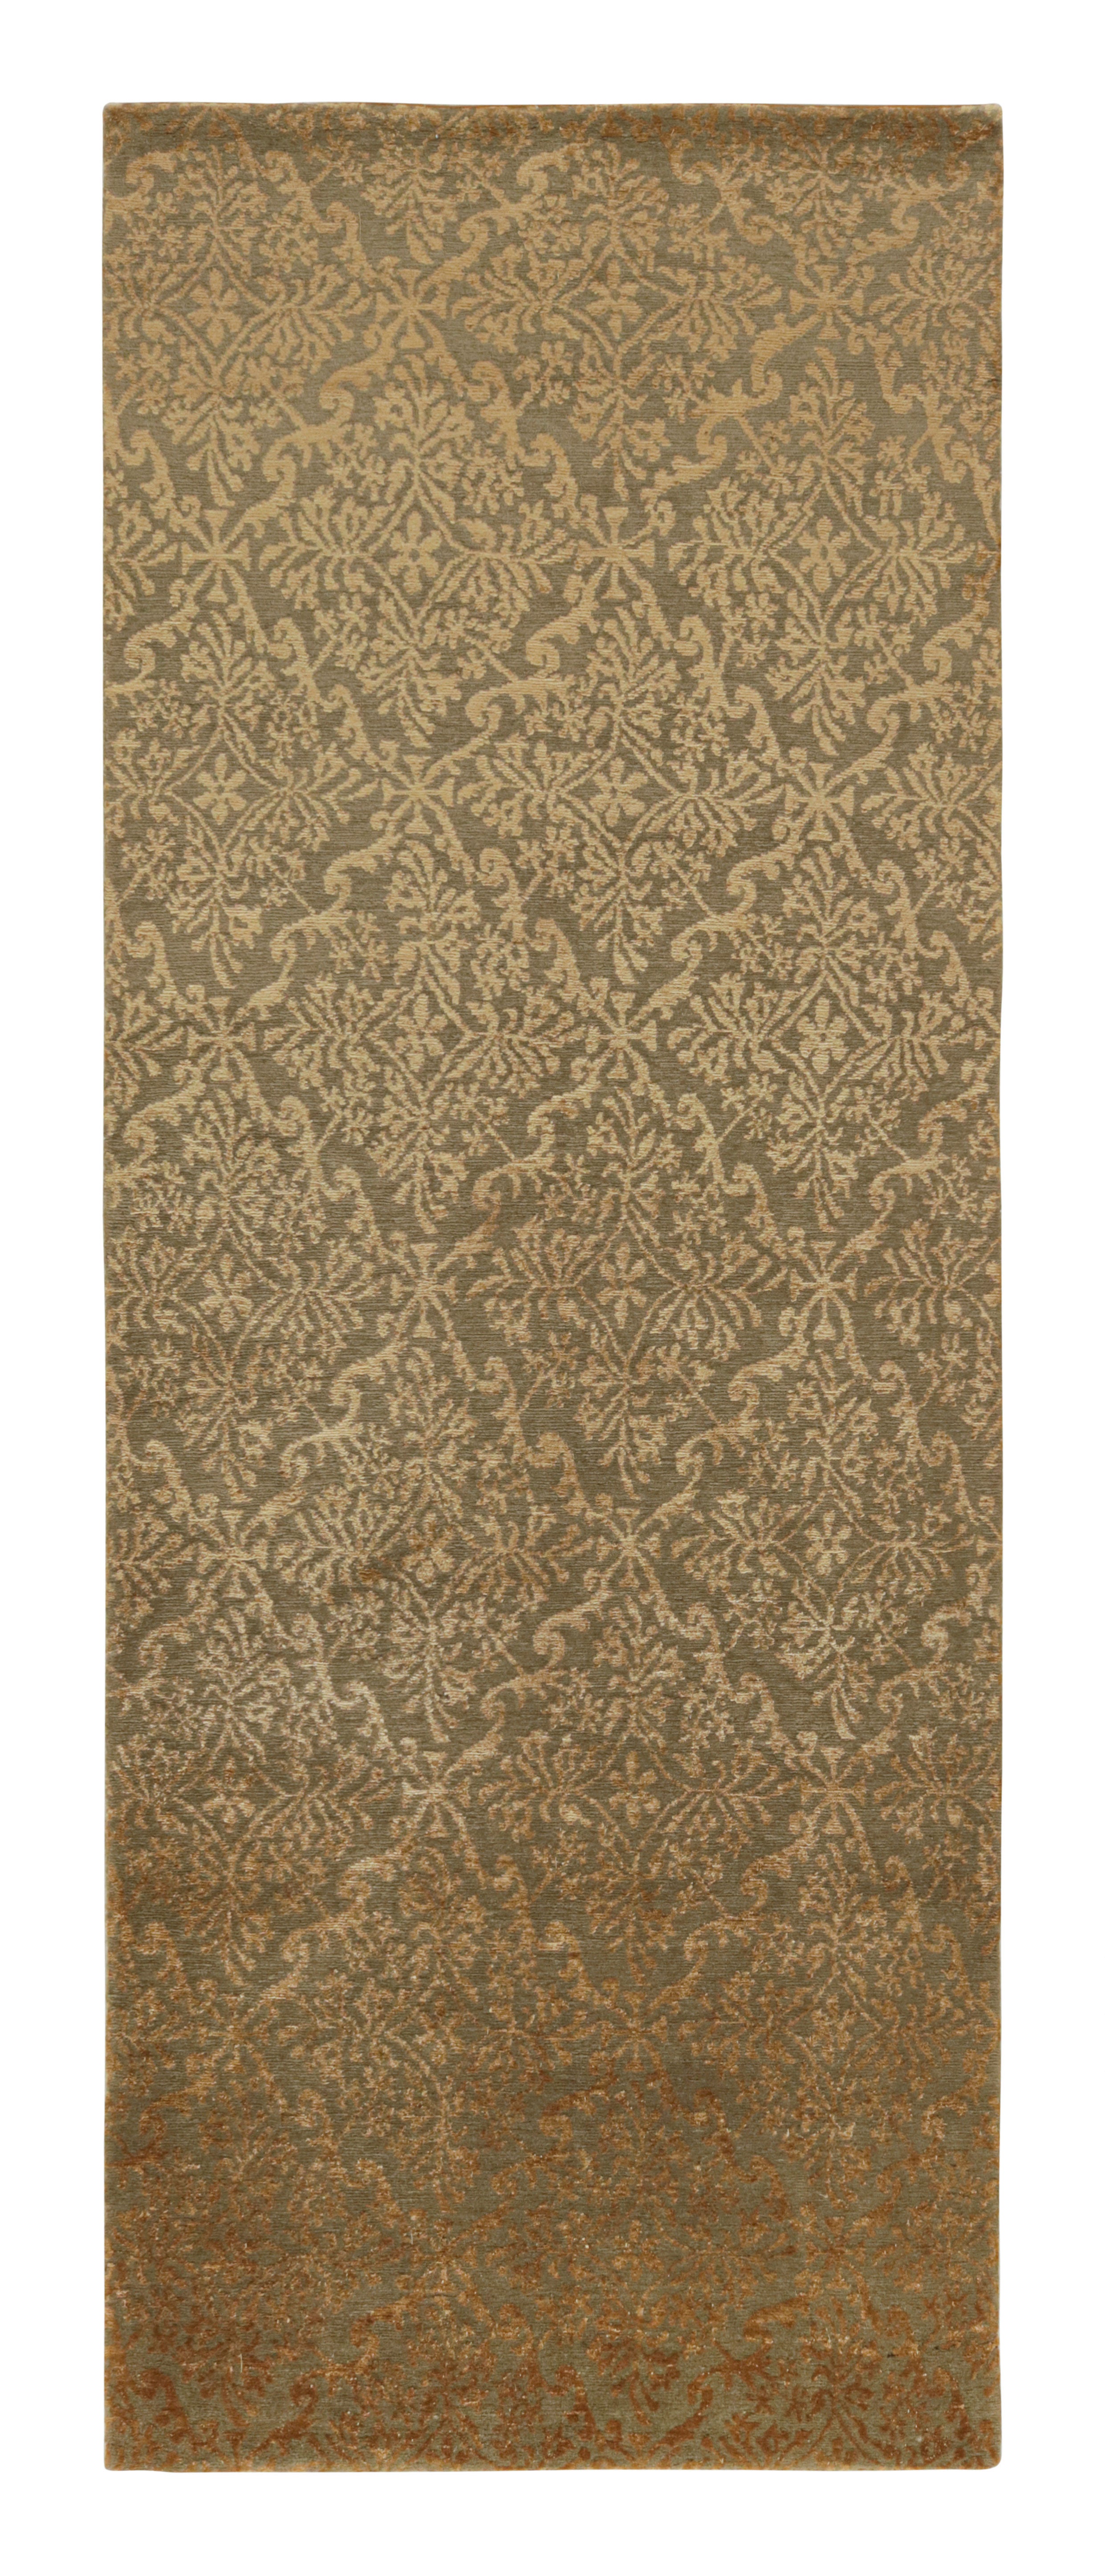 Rug & Kilim’s European Style Runner Rug in Brown and Gold Florals “Cordoba” For Sale